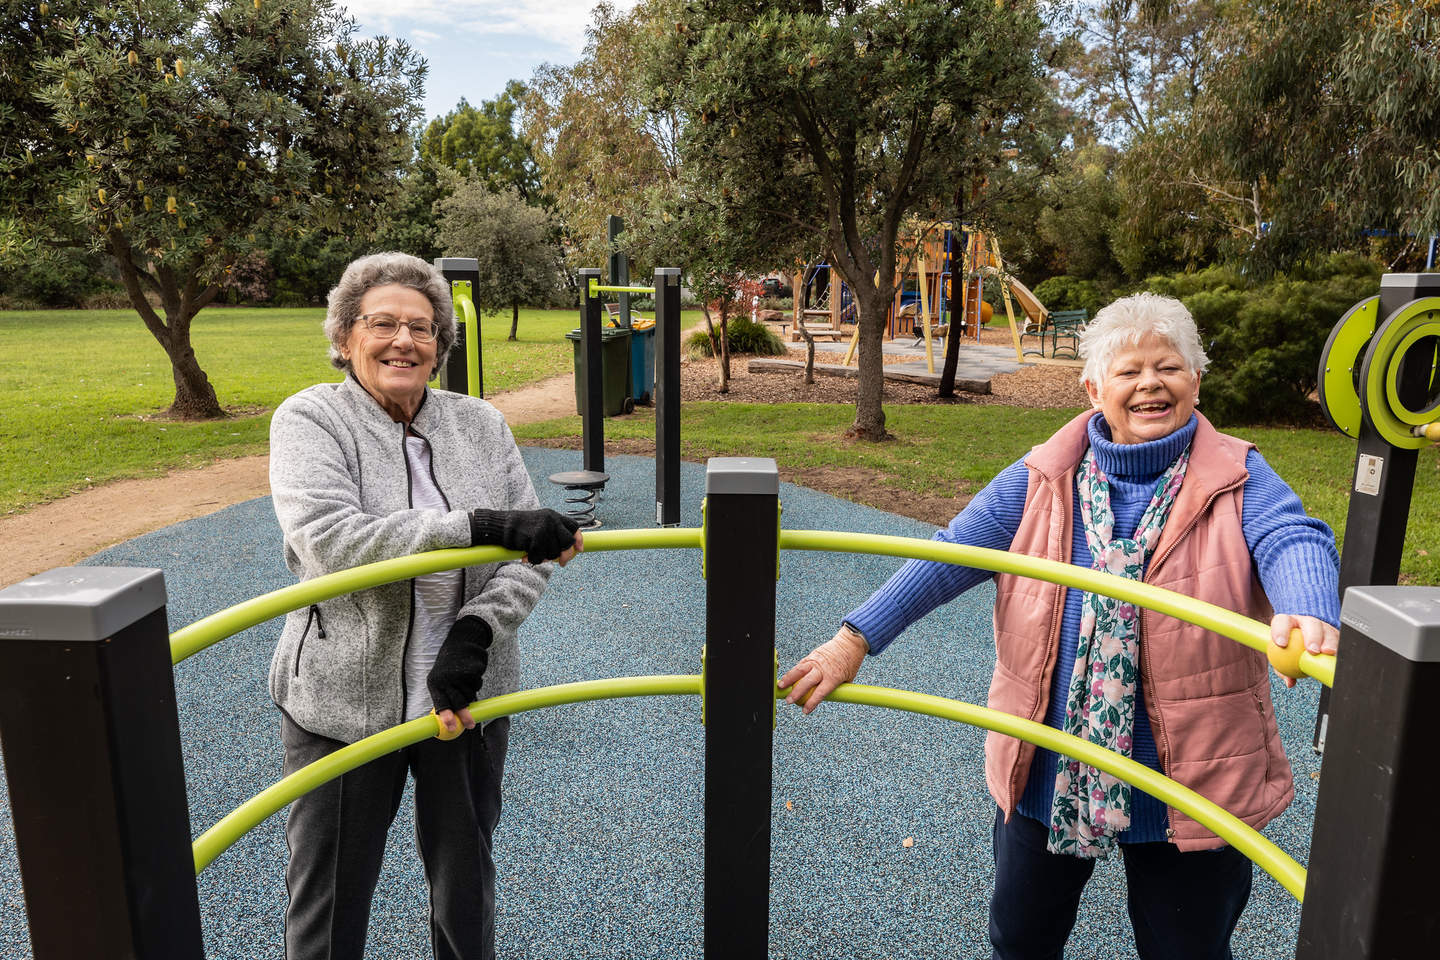 Two woman on the senior exercise equipment.